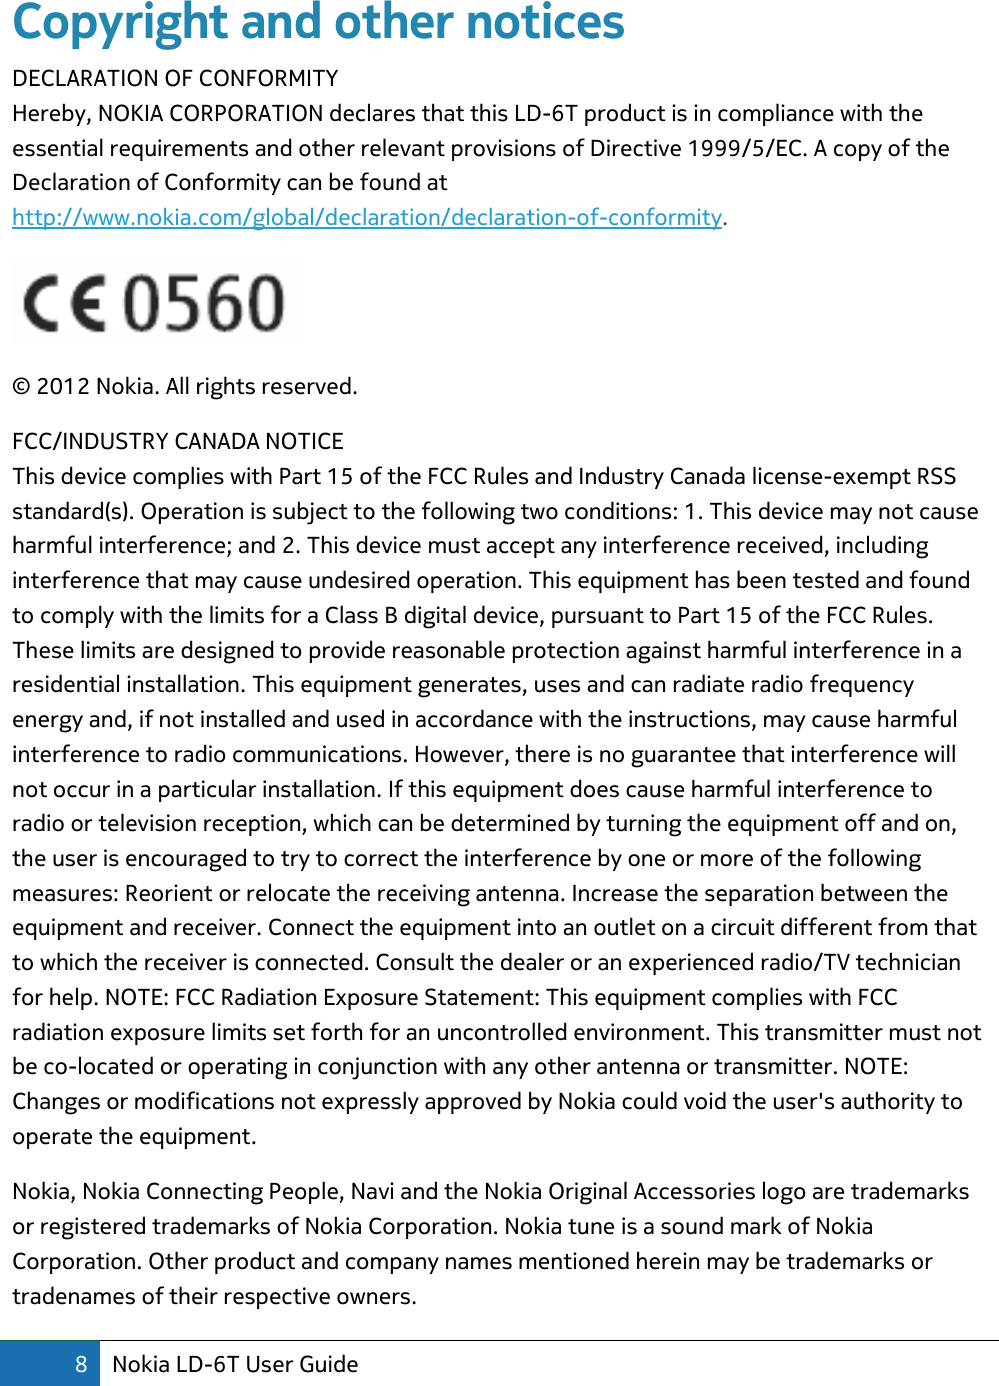 8 Nokia LD-6T User Guide  Copyright and other notices DECLARATION OF CONFORMITY Hereby, NOKIA CORPORATION declares that this LD-6T product is in compliance with the essential requirements and other relevant provisions of Directive 1999/5/EC. A copy of the Declaration of Conformity can be found at http://www.nokia.com/global/declaration/declaration-of-conformity.  © 2012 Nokia. All rights reserved. FCC/INDUSTRY CANADA NOTICE This device complies with Part 15 of the FCC Rules and Industry Canada license-exempt RSS standard(s). Operation is subject to the following two conditions: 1. This device may not cause harmful interference; and 2. This device must accept any interference received, including interference that may cause undesired operation. This equipment has been tested and found to comply with the limits for a Class B digital device, pursuant to Part 15 of the FCC Rules. These limits are designed to provide reasonable protection against harmful interference in a residential installation. This equipment generates, uses and can radiate radio frequency energy and, if not installed and used in accordance with the instructions, may cause harmful interference to radio communications. However, there is no guarantee that interference will not occur in a particular installation. If this equipment does cause harmful interference to radio or television reception, which can be determined by turning the equipment off and on, the user is encouraged to try to correct the interference by one or more of the following measures: Reorient or relocate the receiving antenna. Increase the separation between the equipment and receiver. Connect the equipment into an outlet on a circuit different from that to which the receiver is connected. Consult the dealer or an experienced radio/TV technician for help. NOTE: FCC Radiation Exposure Statement: This equipment complies with FCC radiation exposure limits set forth for an uncontrolled environment. This transmitter must not be co-located or operating in conjunction with any other antenna or transmitter. NOTE: Changes or modifications not expressly approved by Nokia could void the user&apos;s authority to operate the equipment. Nokia, Nokia Connecting People, Navi and the Nokia Original Accessories logo are trademarks or registered trademarks of Nokia Corporation. Nokia tune is a sound mark of Nokia Corporation. Other product and company names mentioned herein may be trademarks or tradenames of their respective owners. 